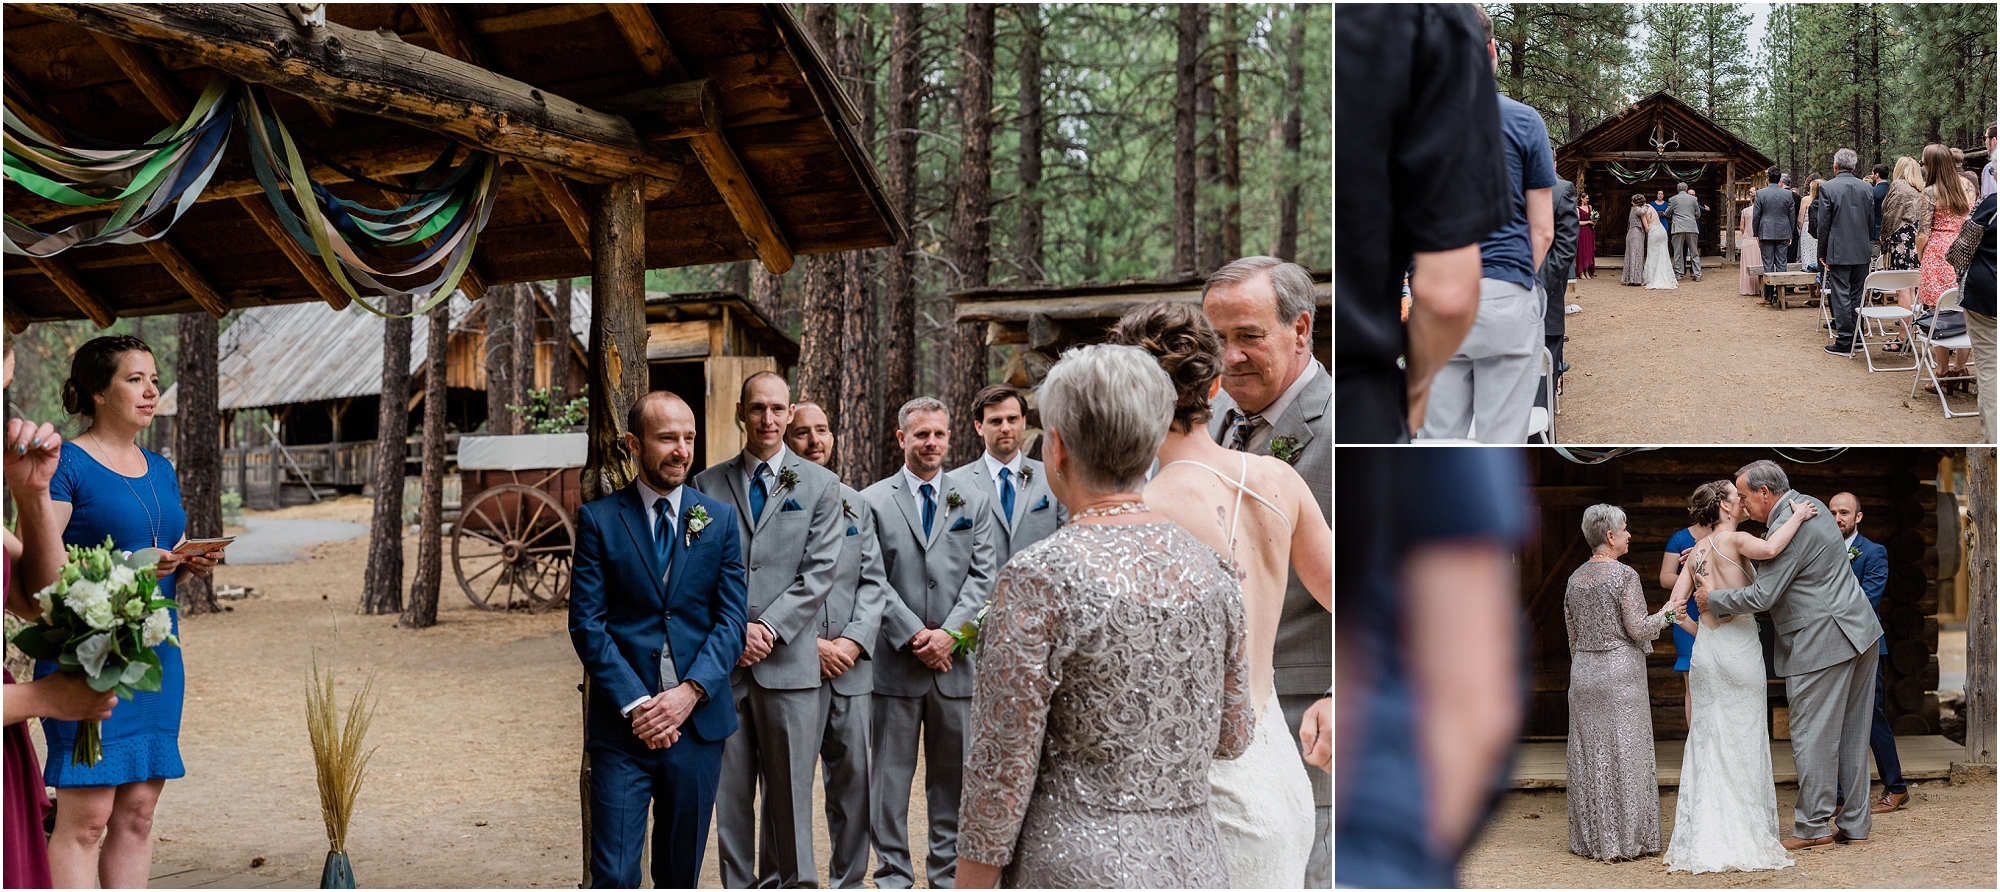 The bride hugs her parents and the groom shakes her father's hand, as he gets ready to marry his beautiful bride at this High Desert Museum homestead wedding in Bend, OR. | Erica Swantek Photography